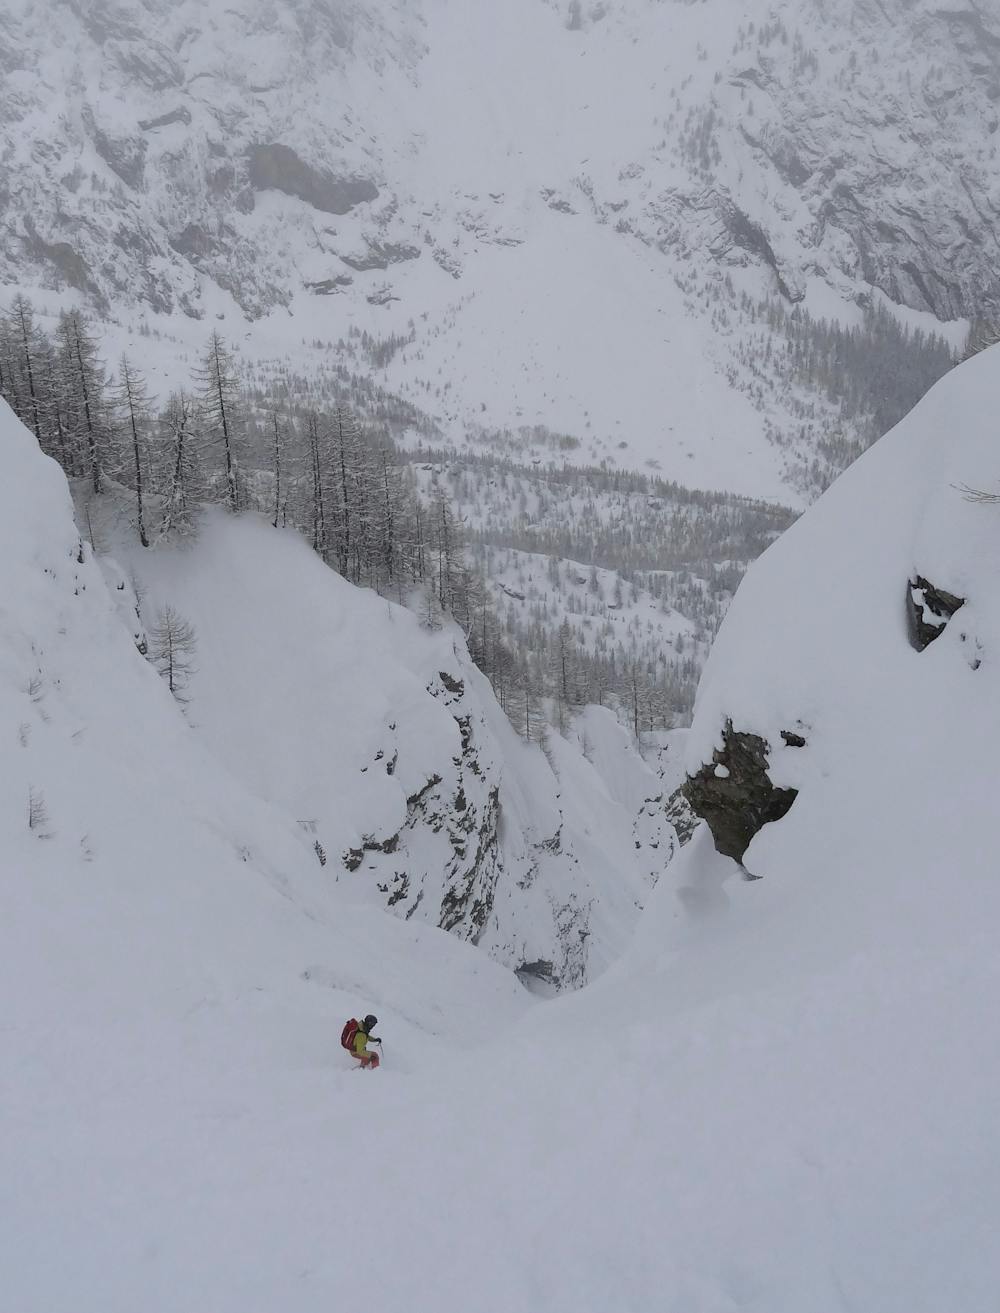 Fantastic snow and ambience in the heart of the couloir.